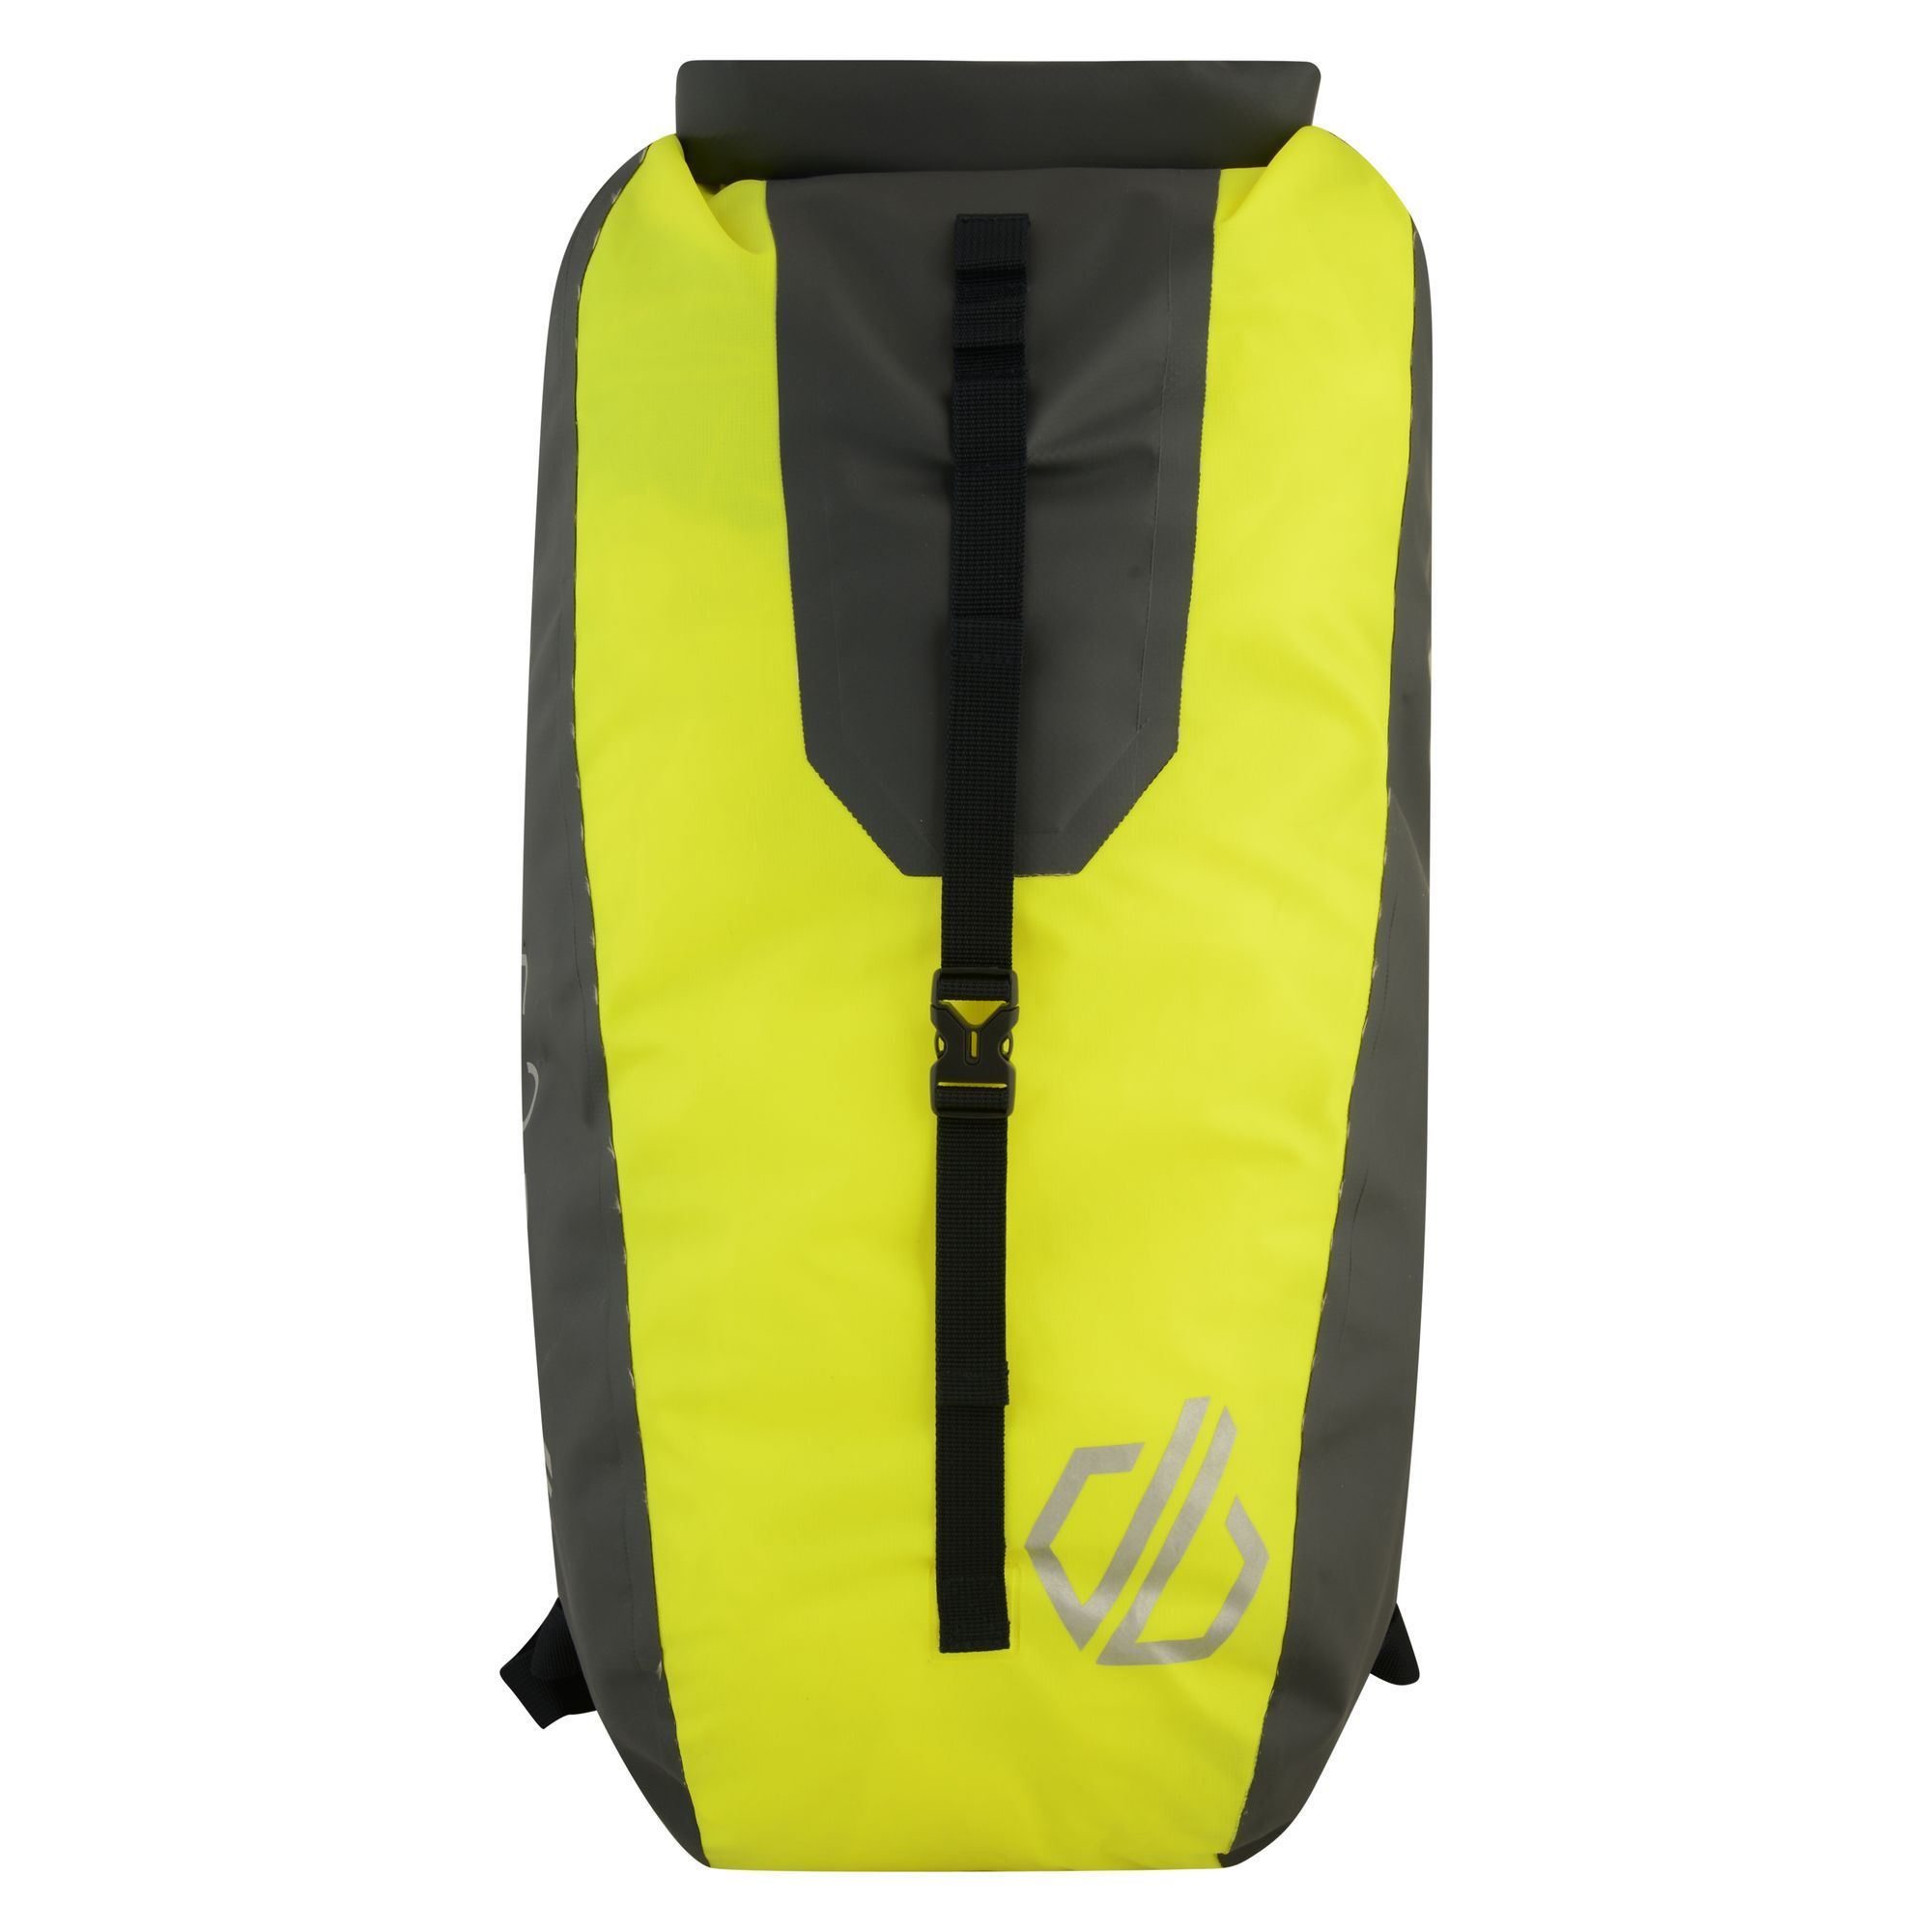 100% polyester tarpaulin waterproof fabric. . 30L capacity.  Heat sealed seams. Roll top closure with clip fastening. Padded shoulder straps. Reflective print detail. Bike light/reflector attachment loop.